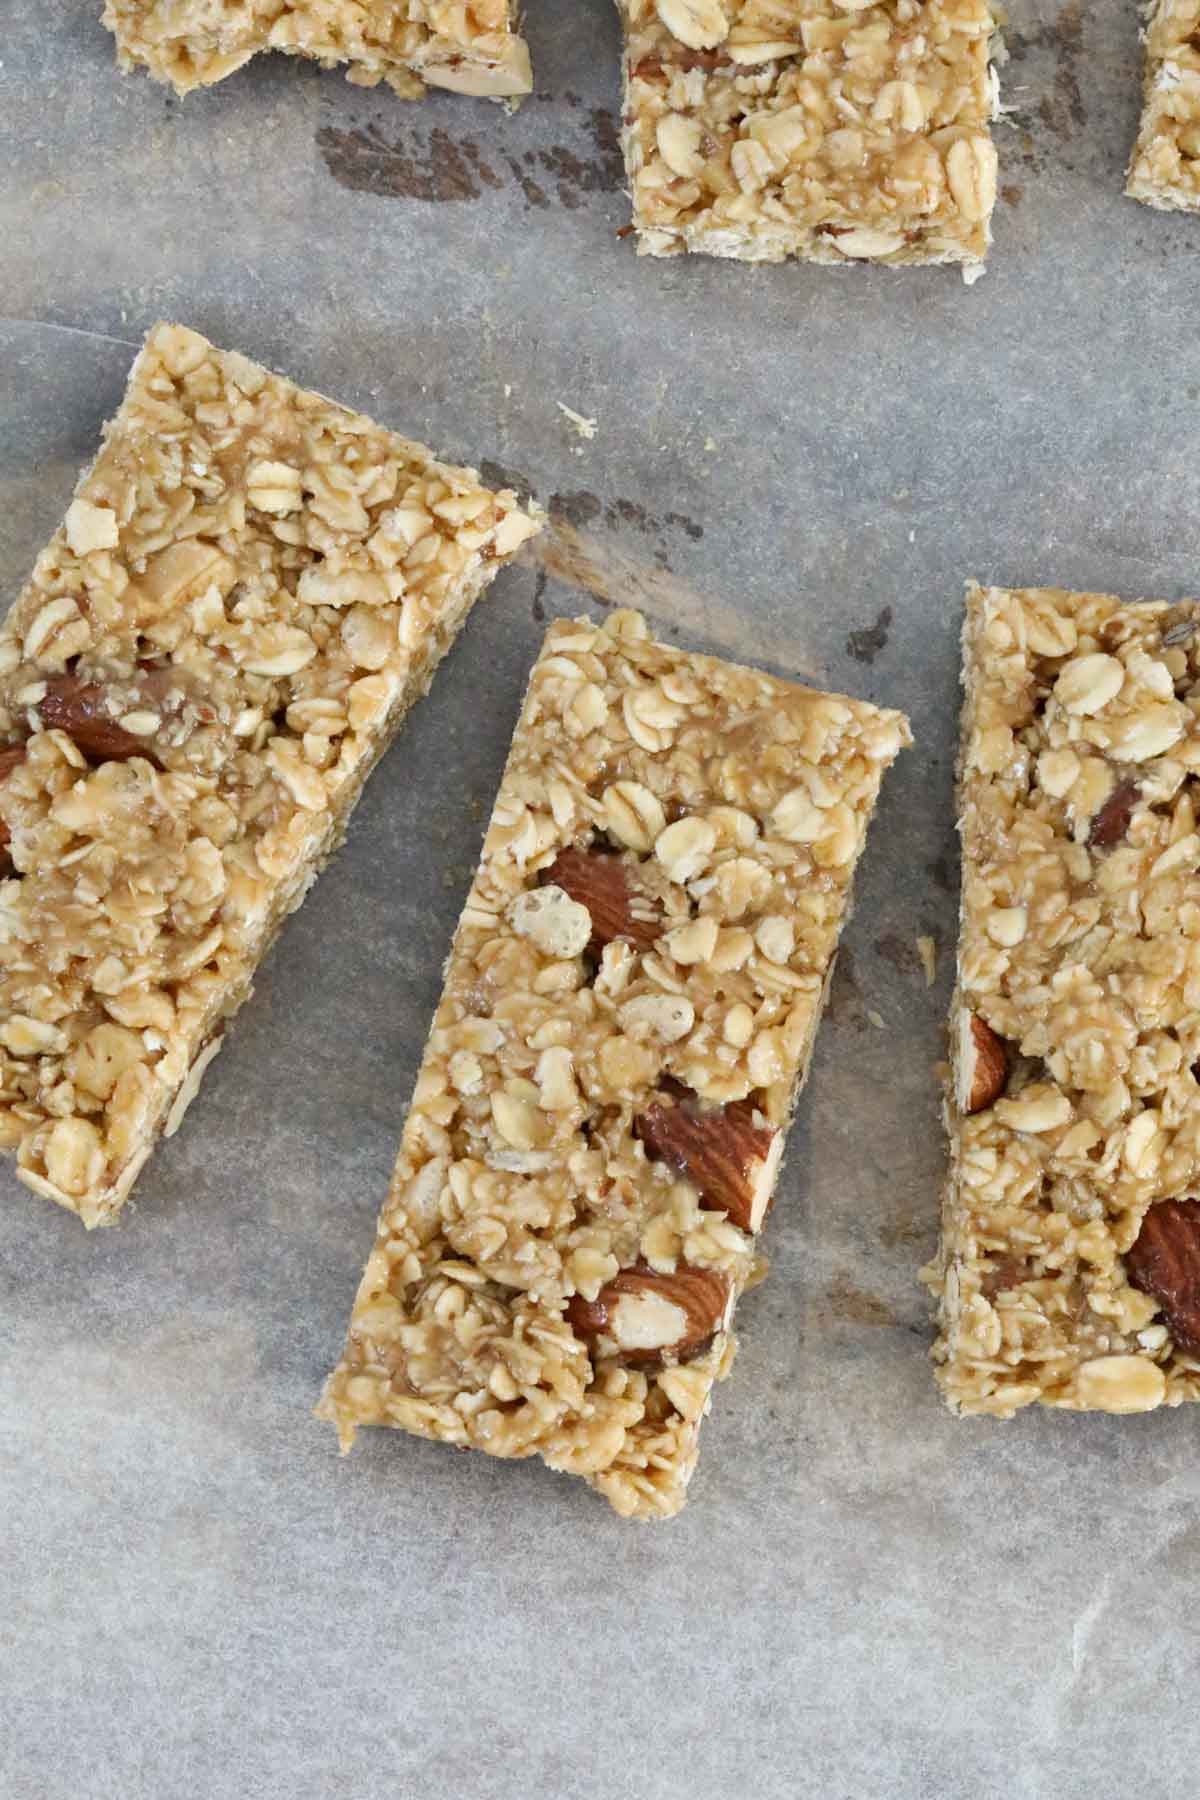 Pieces of muesli slice on a chopping board.